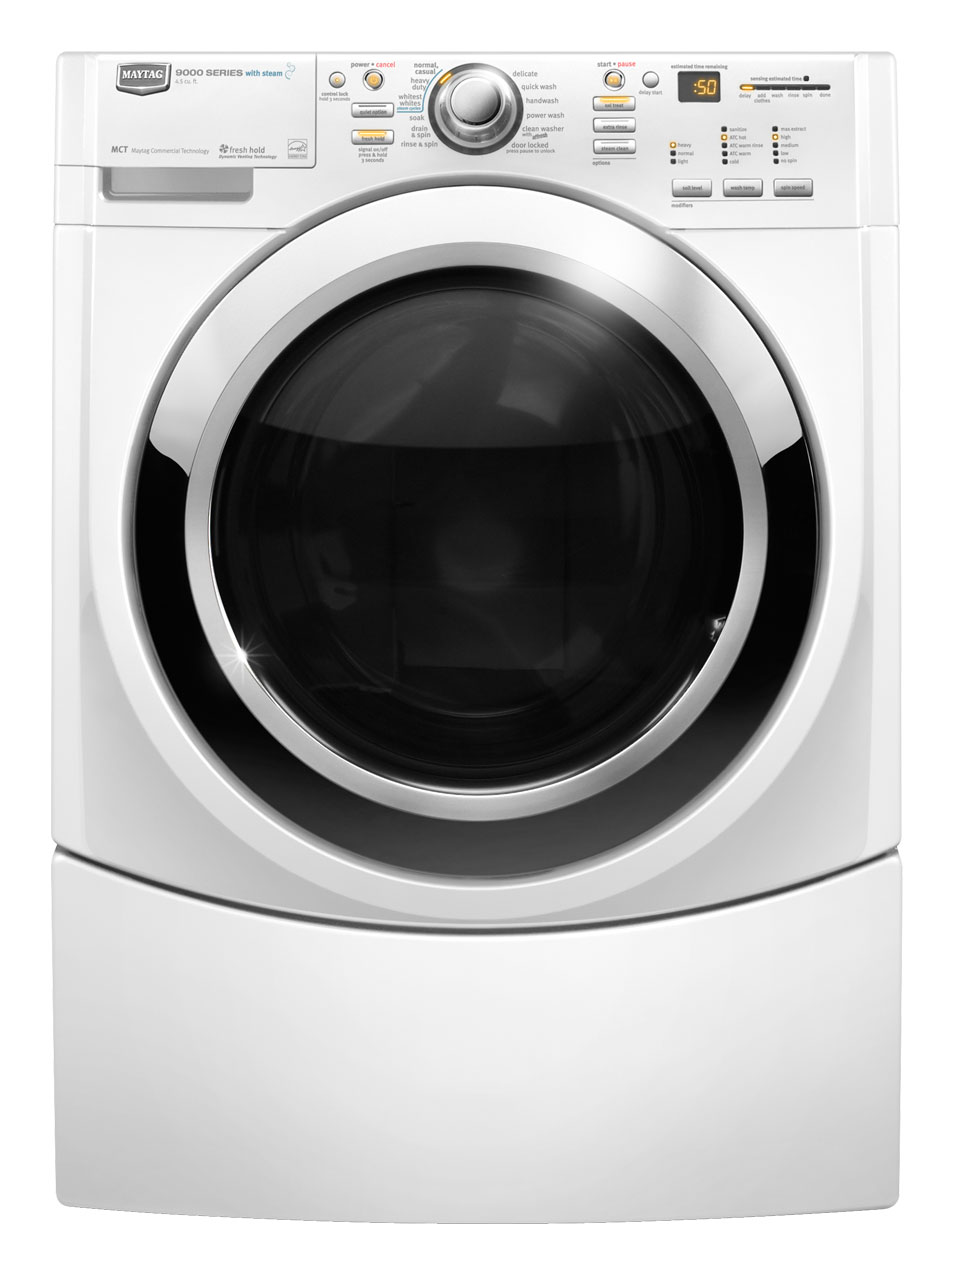 Maytag Performance 3.9 cu ft High-Efficiency Front-Load Washers (White) ENERGY STAR (Model #: MHWE950WW)